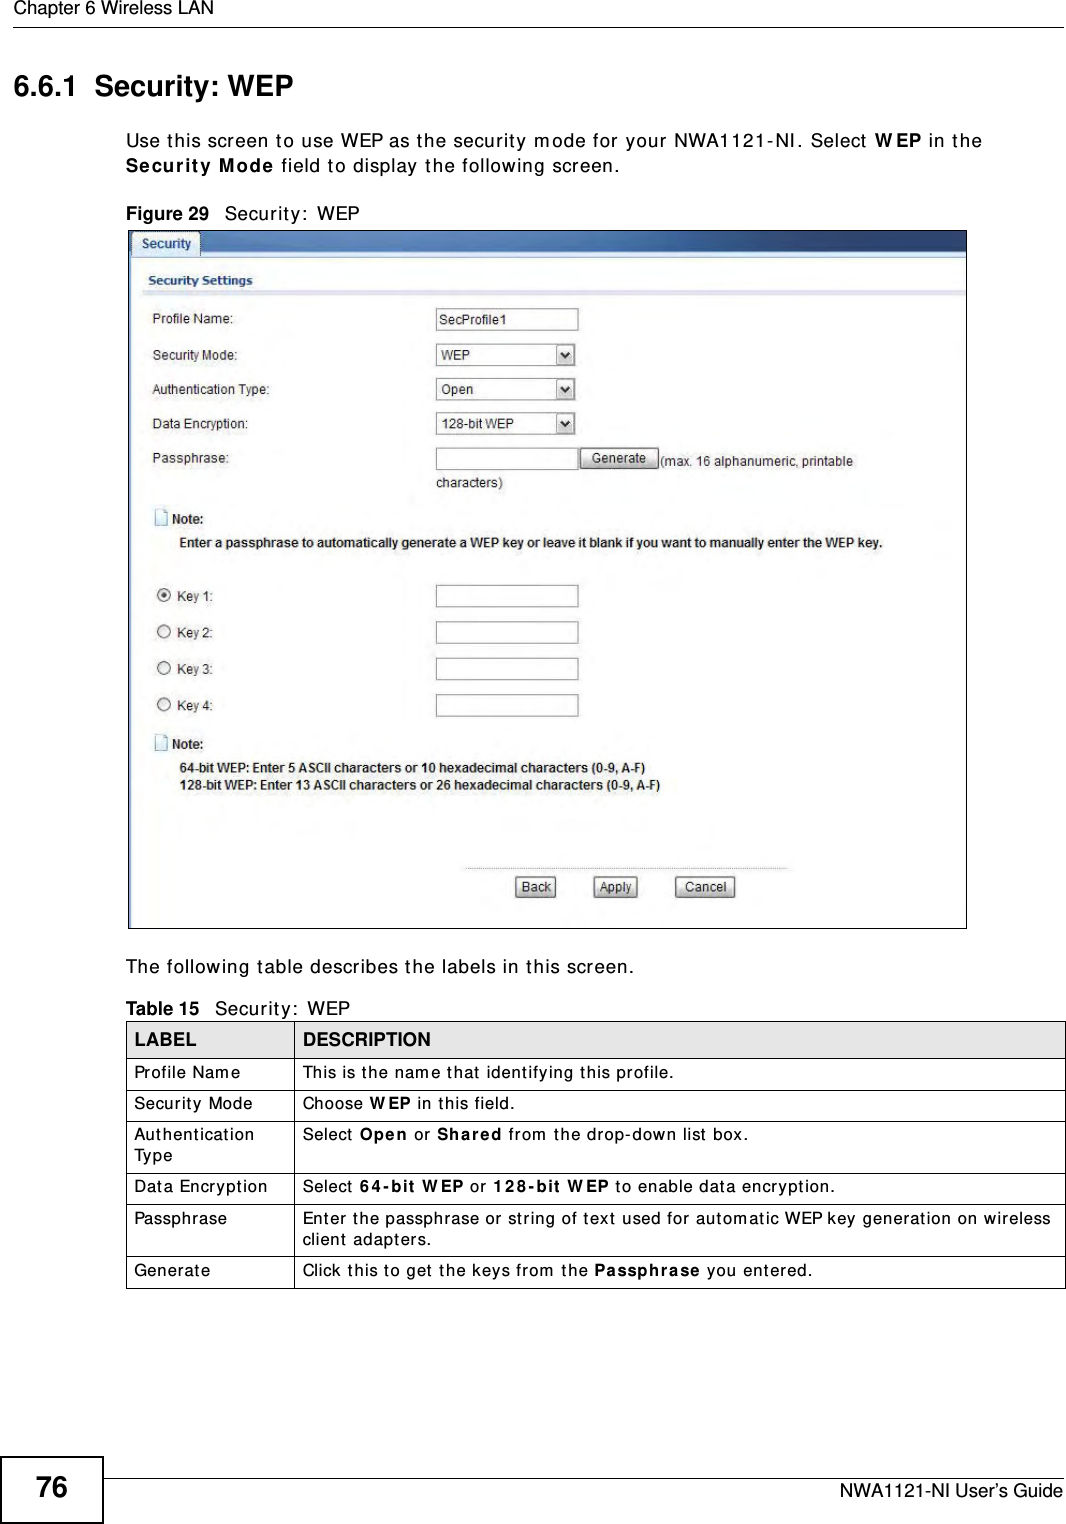 Chapter 6 Wireless LANNWA1121-NI User’s Guide766.6.1  Security: WEPUse this screen to use WEP as the security mode for your NWA1121-NI. Select WEP in the Security Mode field to display the following screen.Figure 29   Security: WEPThe following table describes the labels in this screen.Table 15   Security: WEPLABEL DESCRIPTIONProfile Name This is the name that identifying this profile.Security Mode Choose WEP in this field.Authentication Type Select Open or Shared from the drop-down list box. Data Encryption Select 64-bit WEP or 128-bit WEP to enable data encryption.  Passphrase Enter the passphrase or string of text used for automatic WEP key generation on wireless client adapters. Generate Click this to get the keys from the Passphrase you entered.